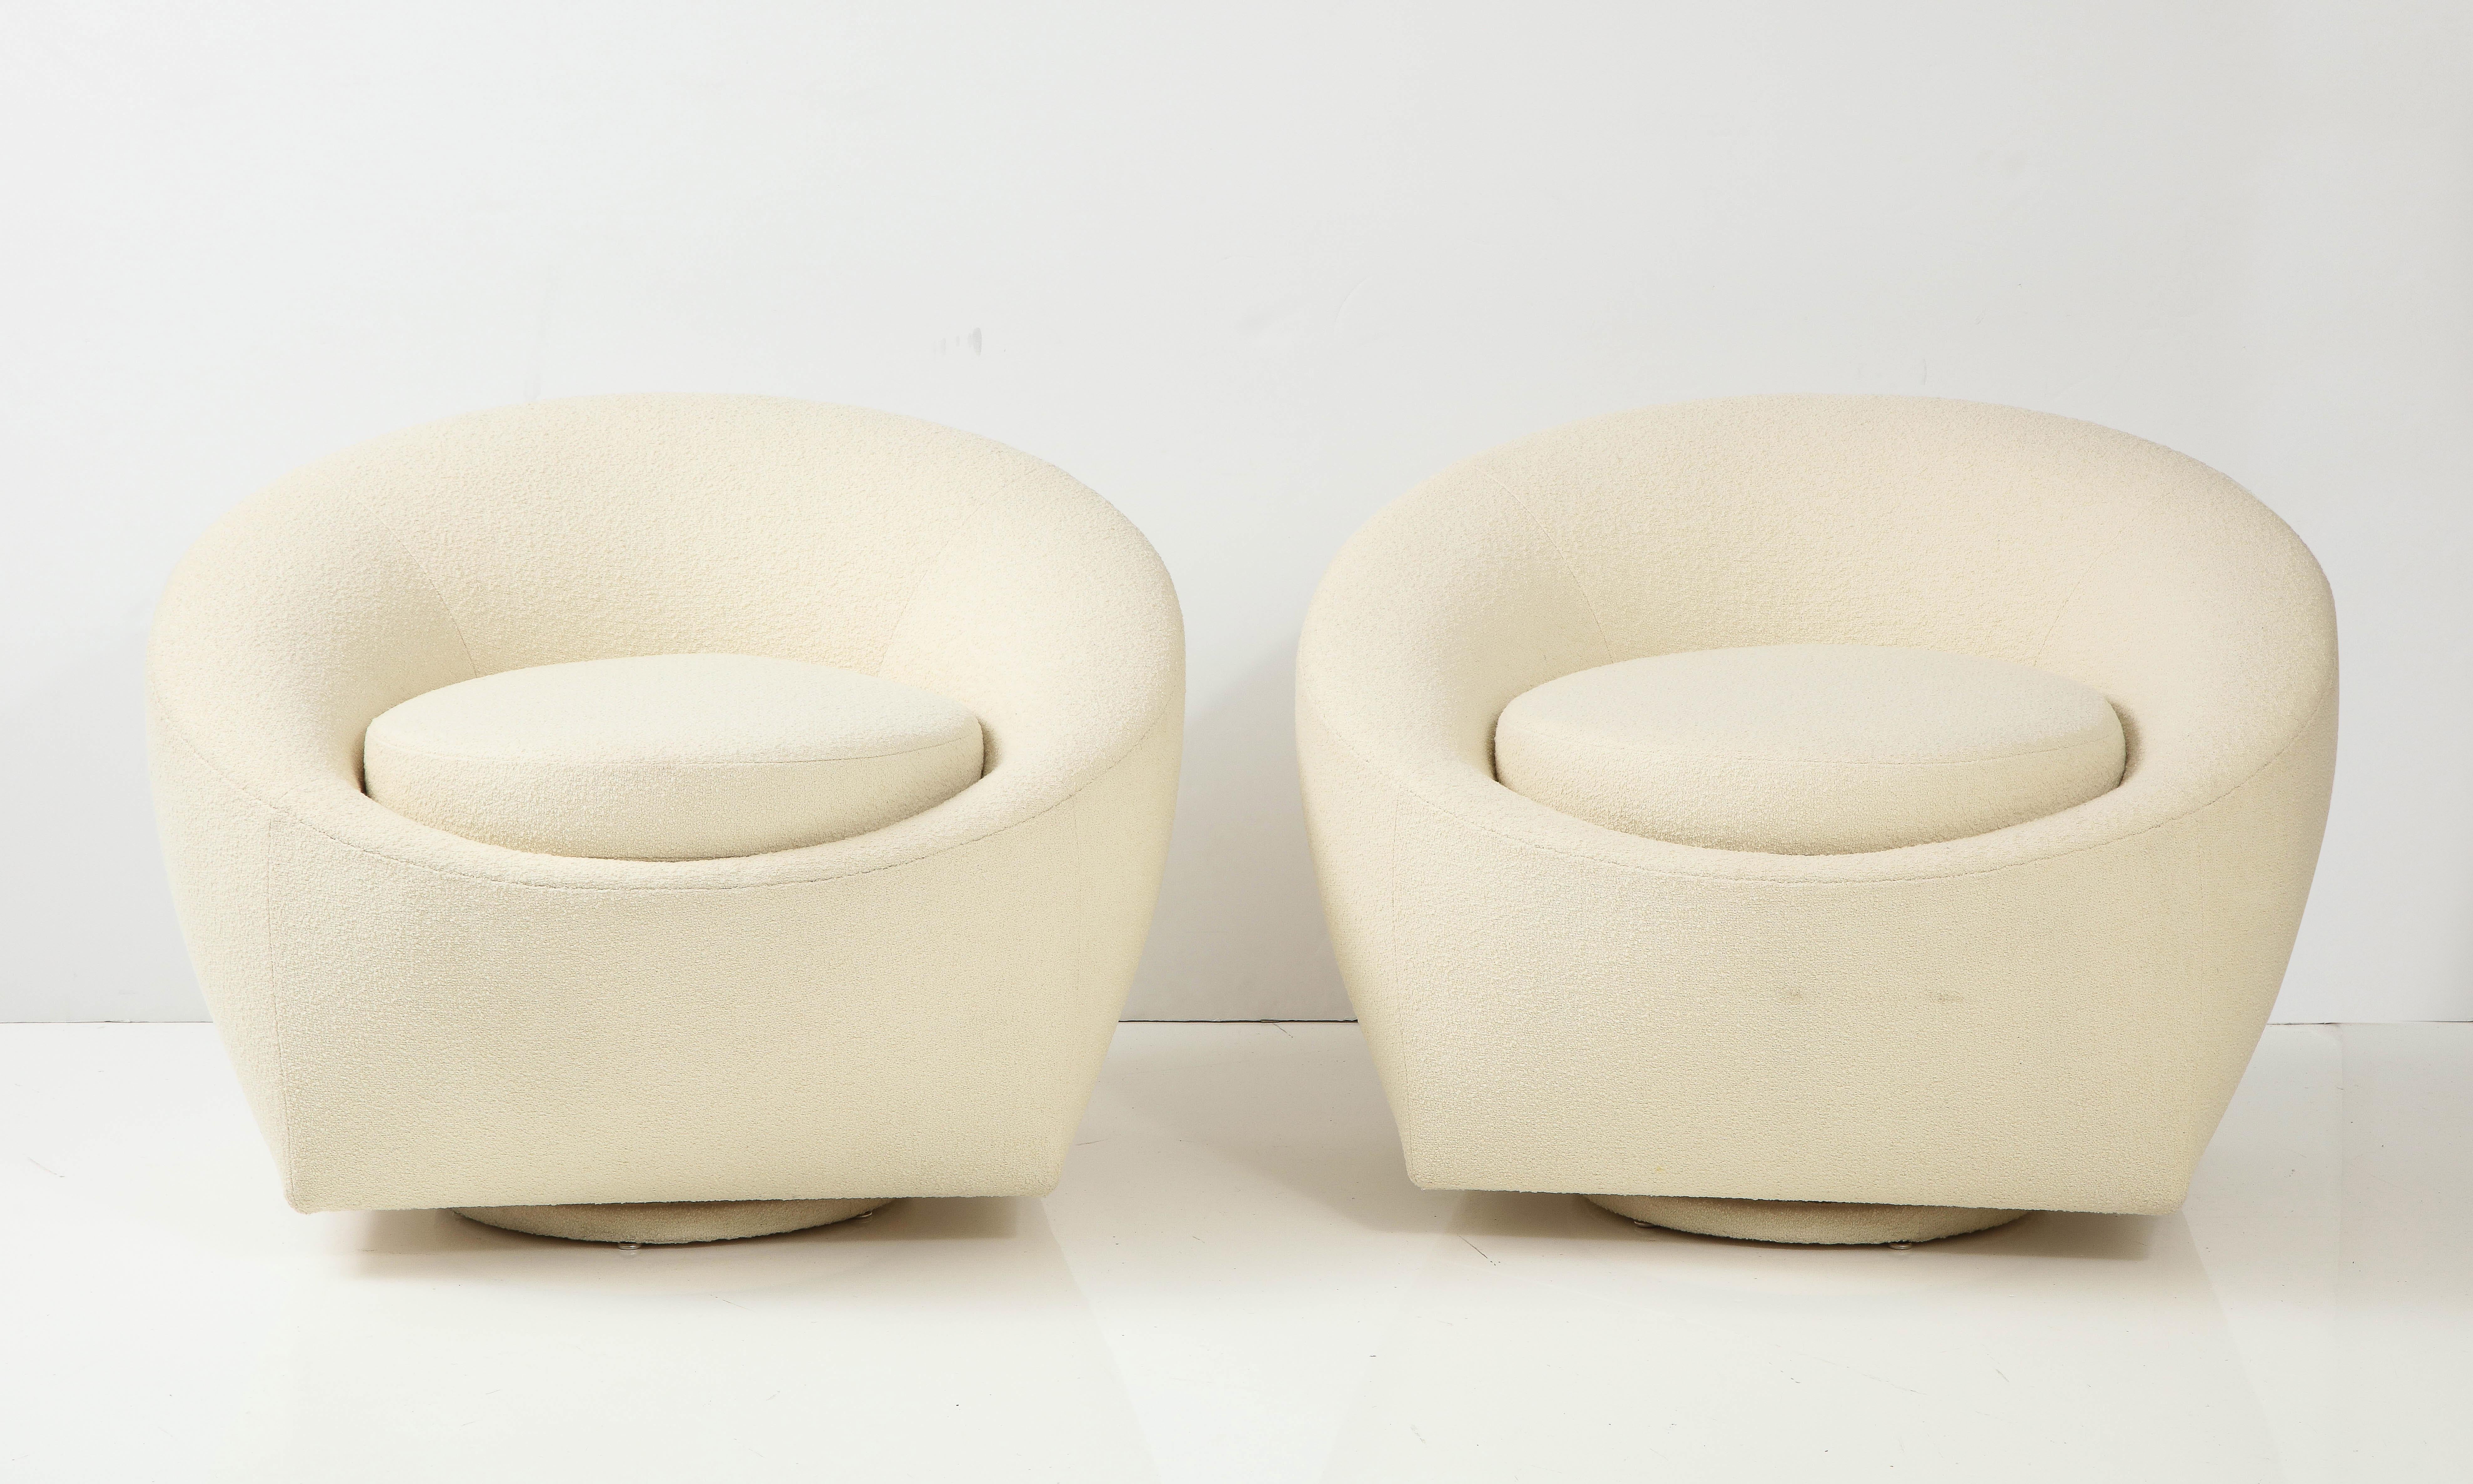 Pair of Mid-Century Modern swivel chairs that have been Newly Reupholstered 
In soft Ivory Knoll Boucle fabric. The bases of the chairs are also reupholstered in the 
same fabric.
